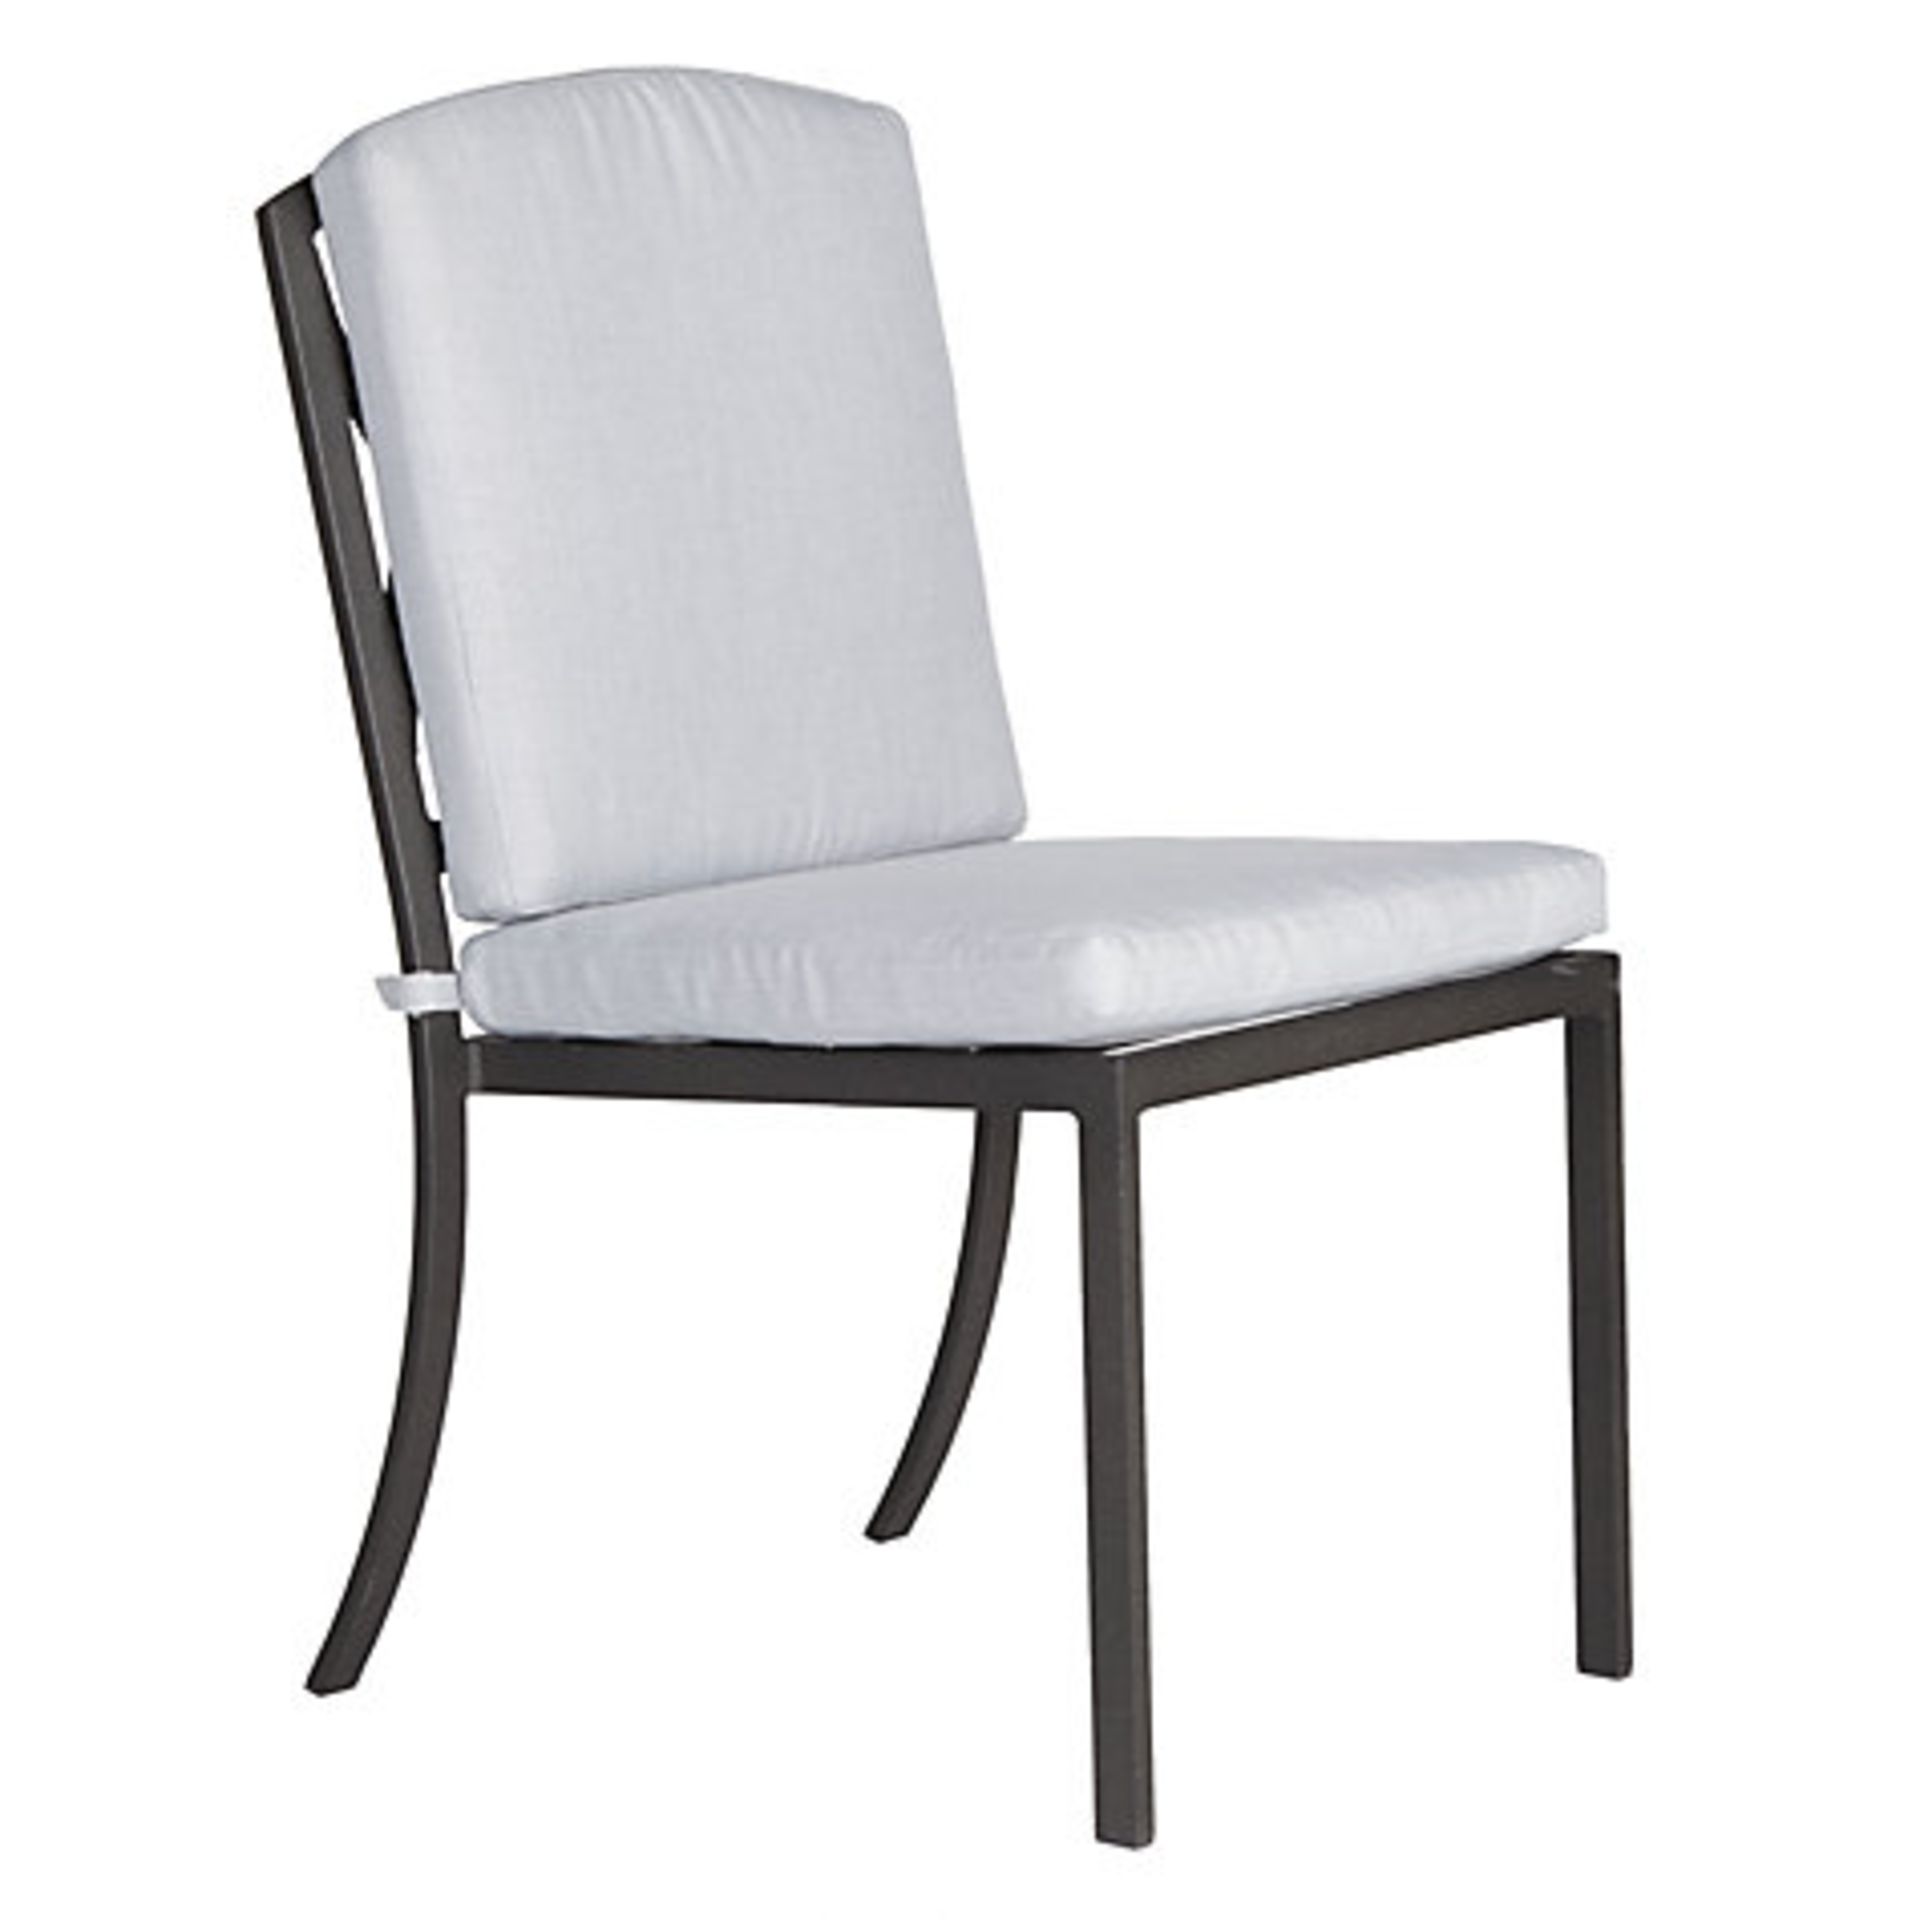 1 x BOXED PAIR OF MARLOW CHAIRS RRP £60 EACH *PLEASE NOTE THAT THE BID PRICE IS MULTIPLIED BY THE